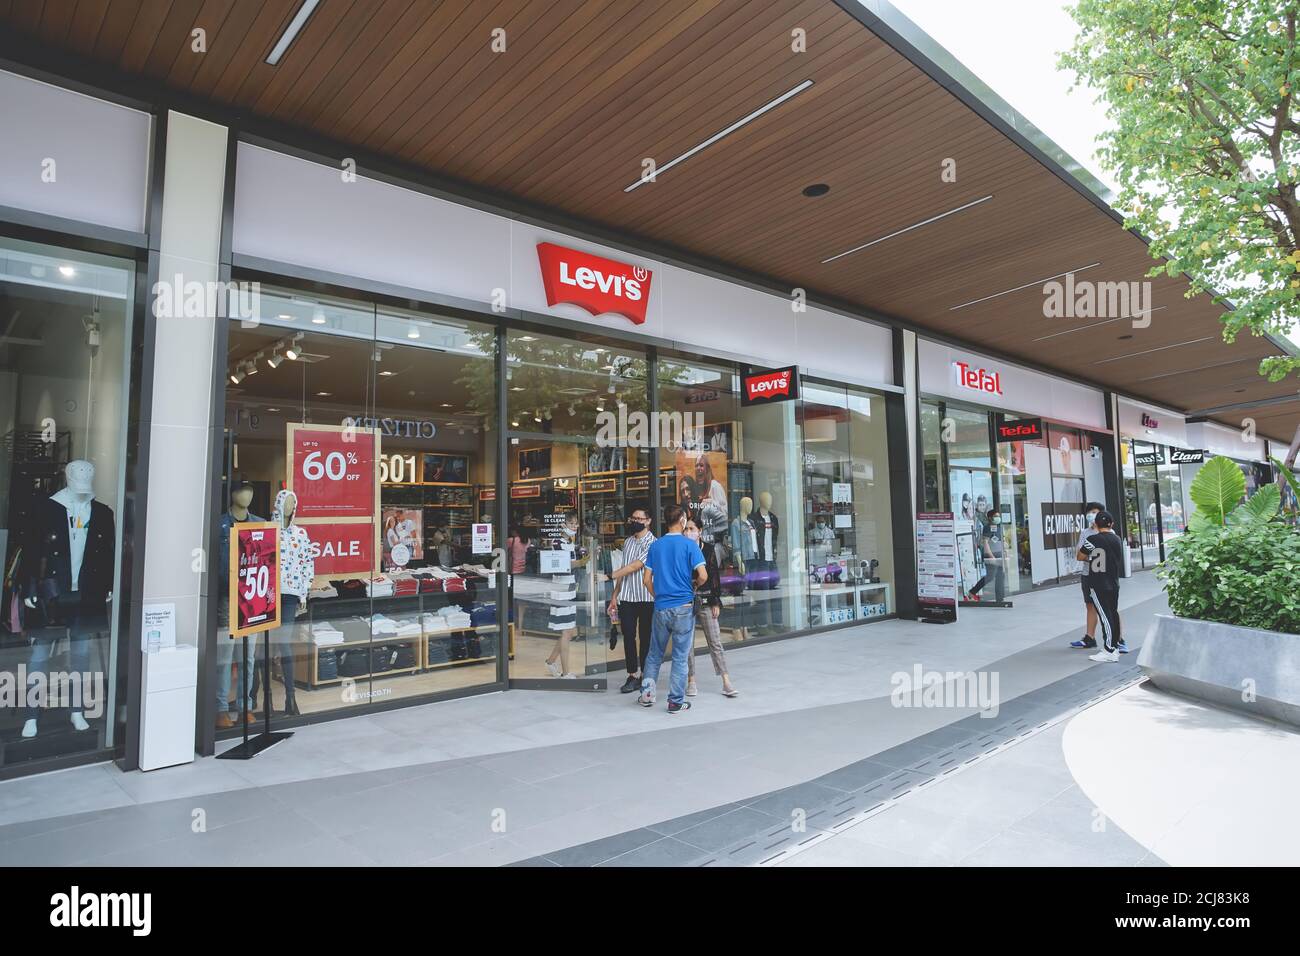 Levis Shop High Resolution Stock Photography and Images - Alamy